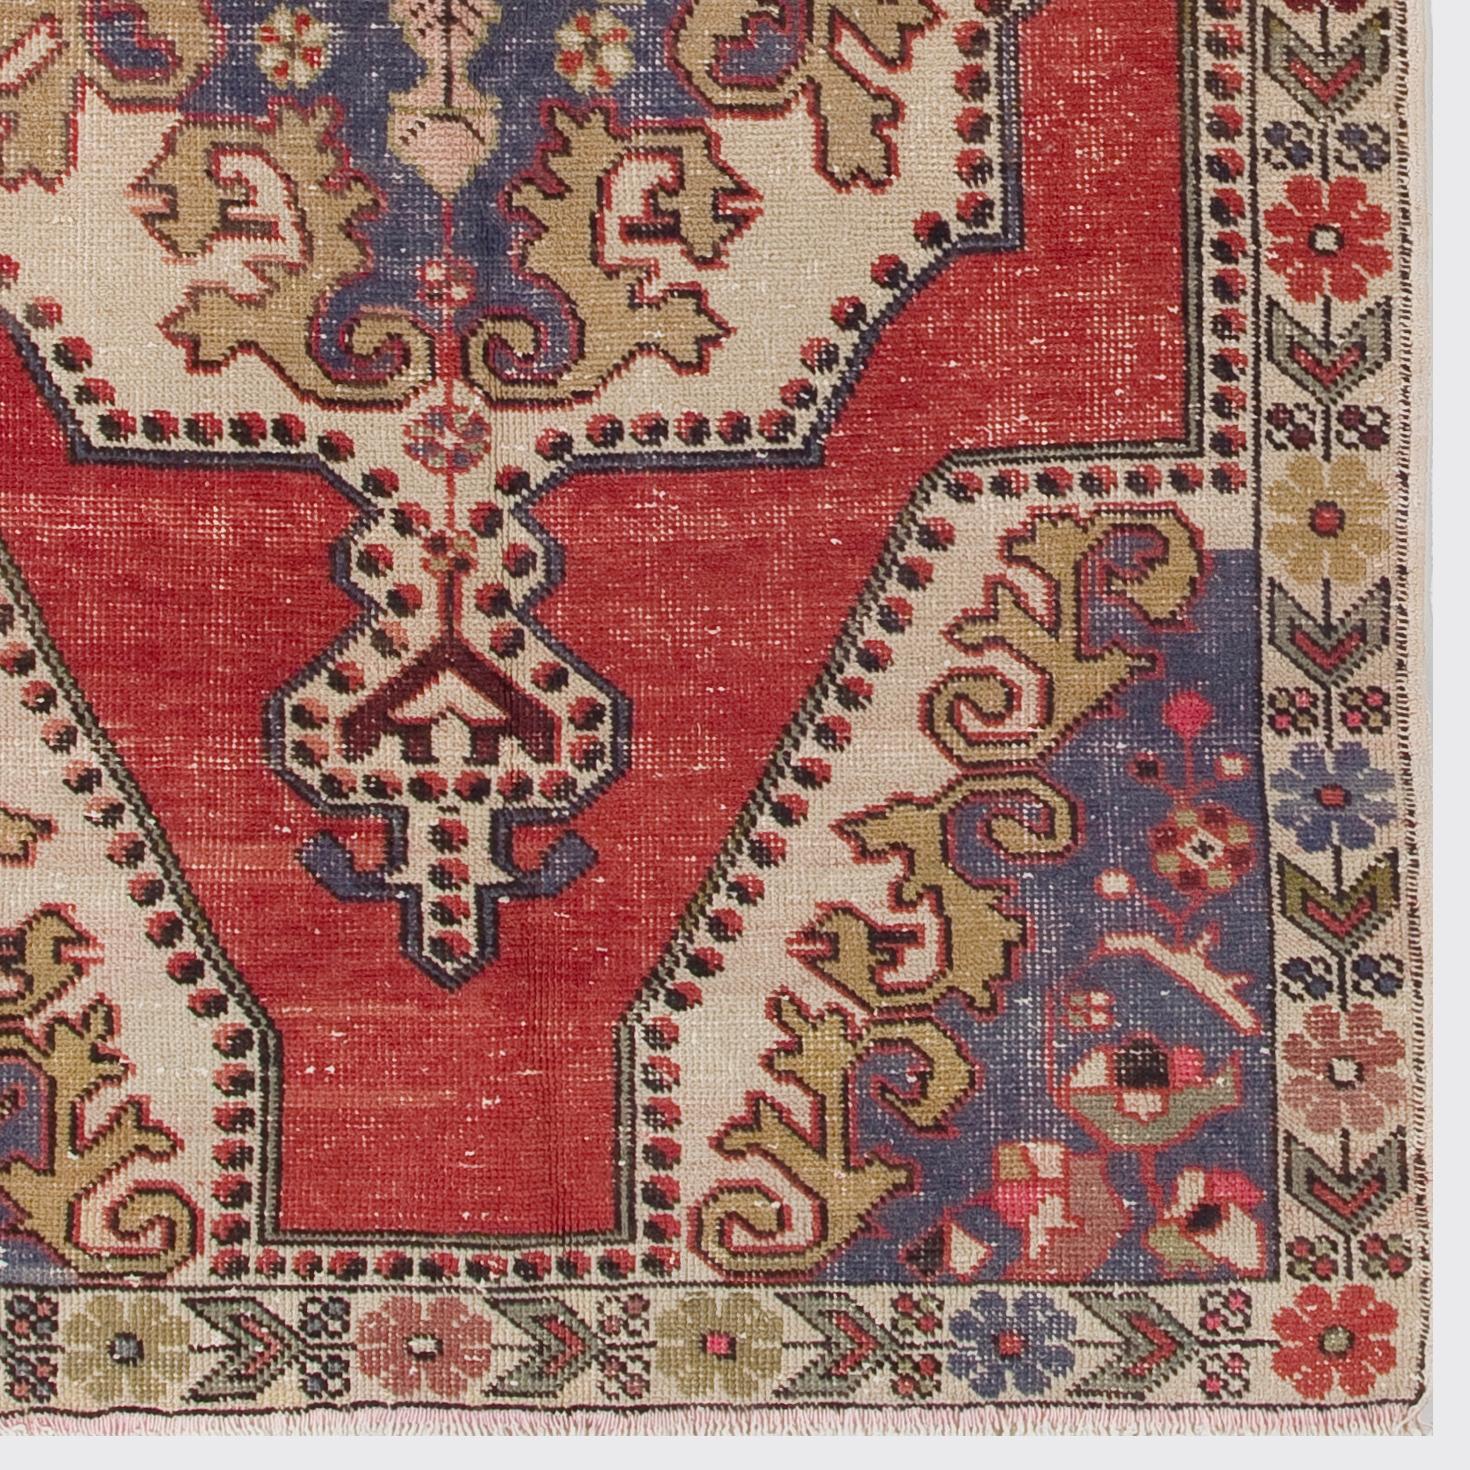 Turkish 4.4x7.2 Ft Unique Anatolian Accent Rug with Floral Border. Red, Beige and Blue For Sale